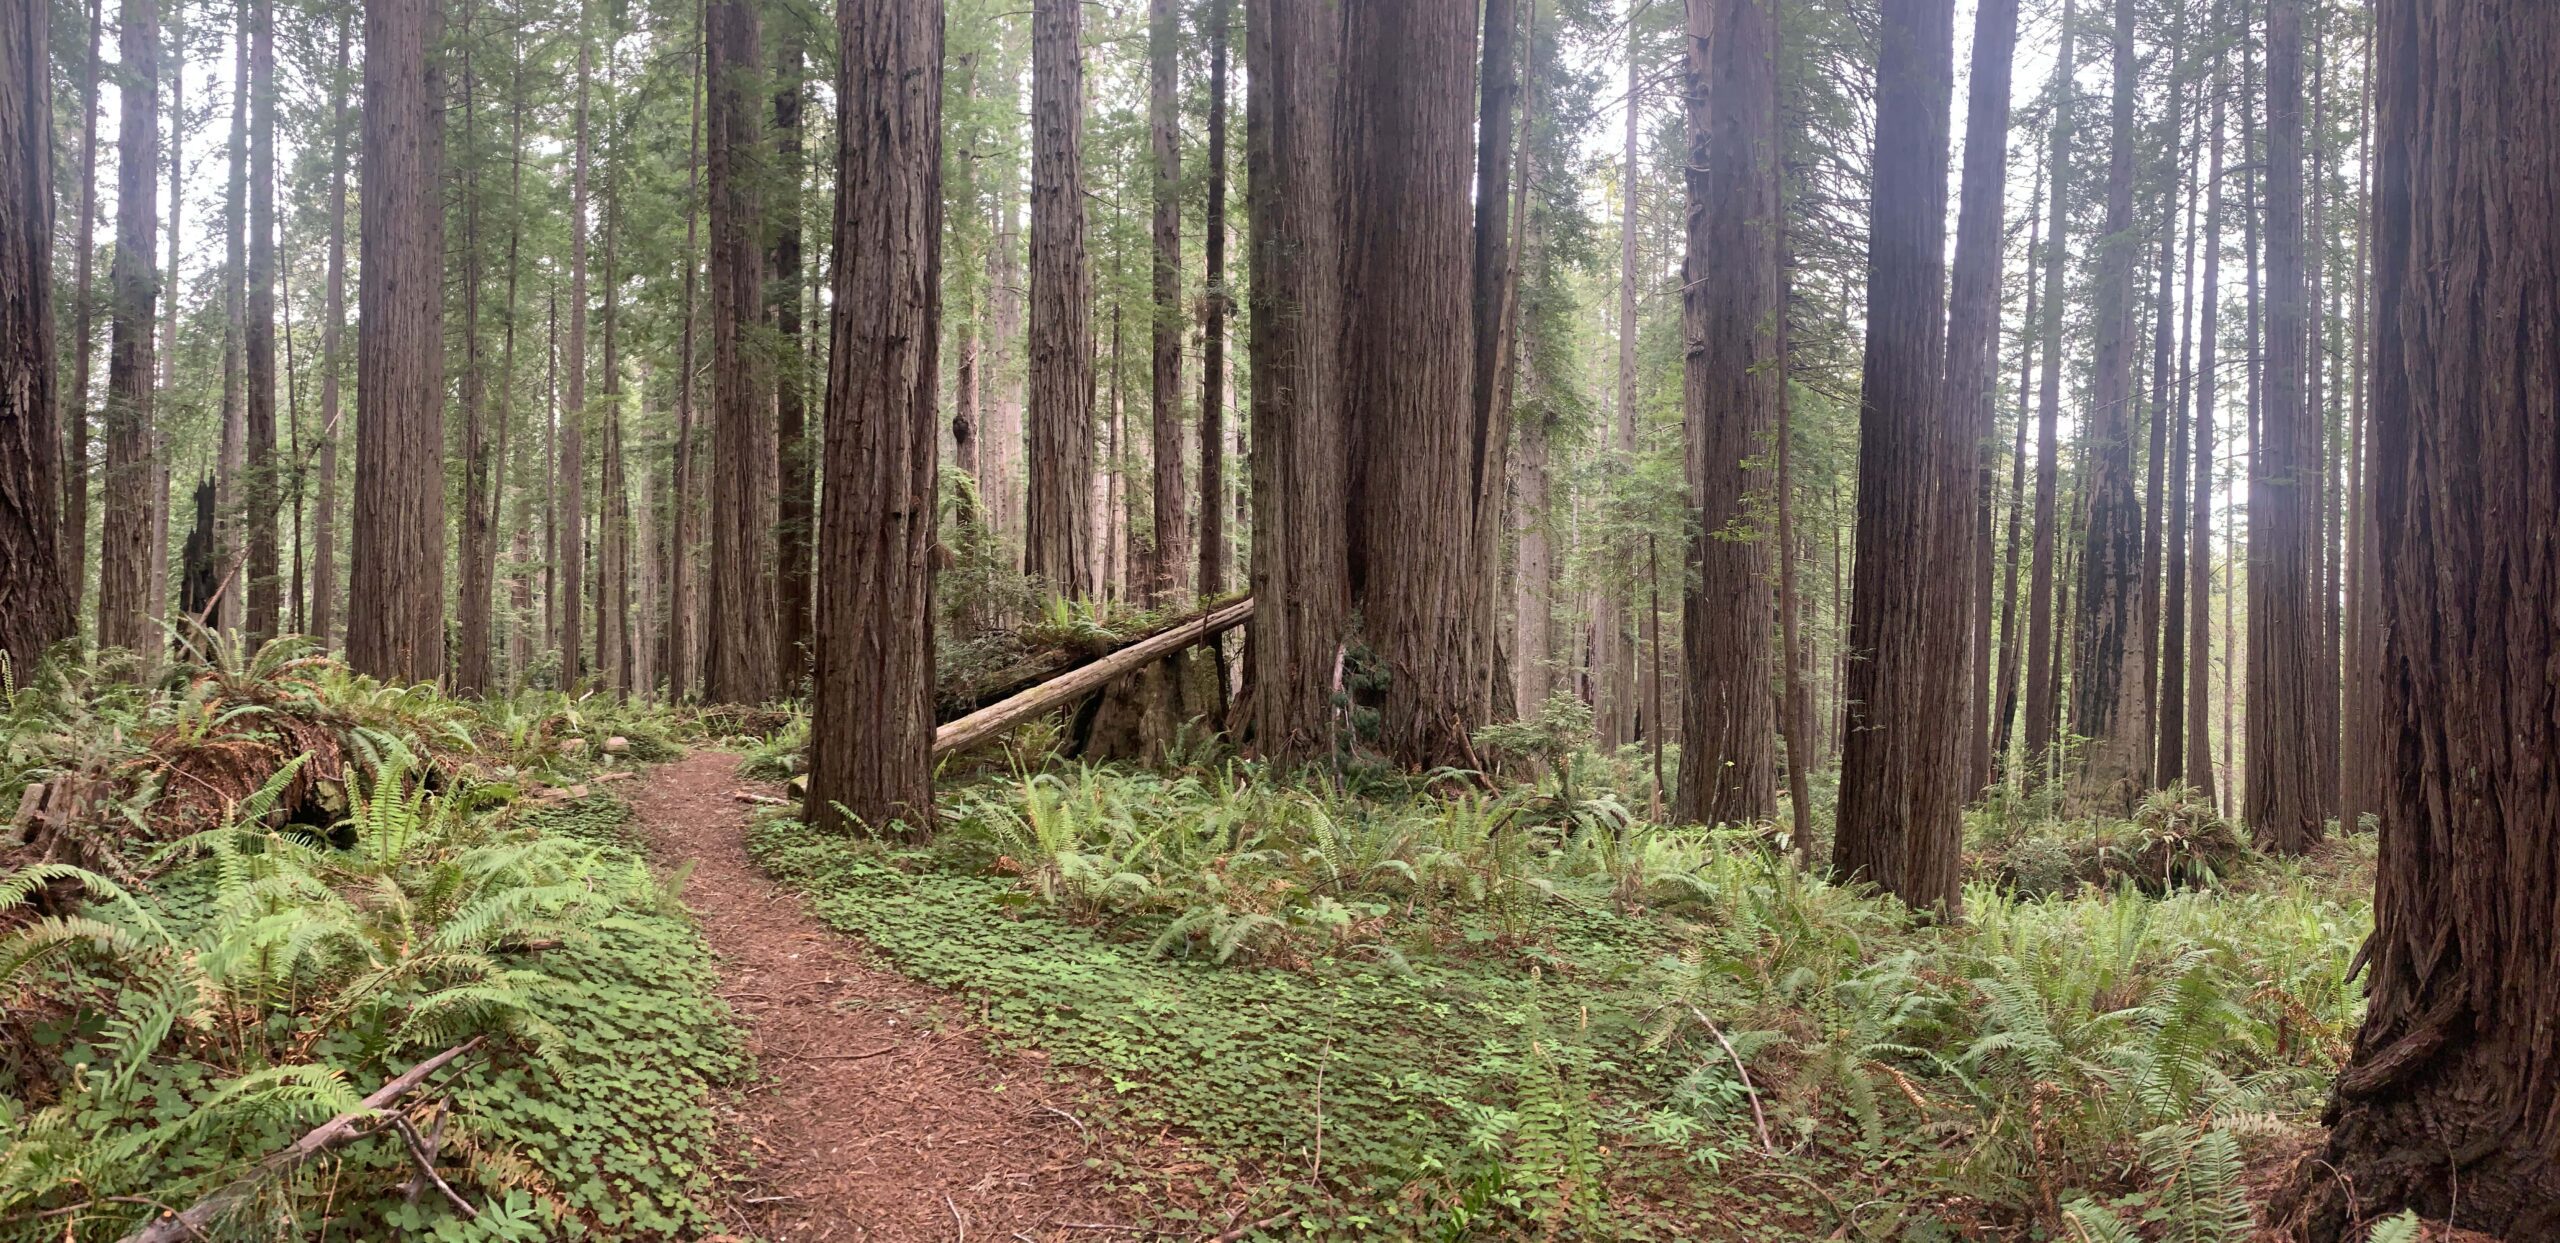 The Redwoods of Prairie Creek State Park